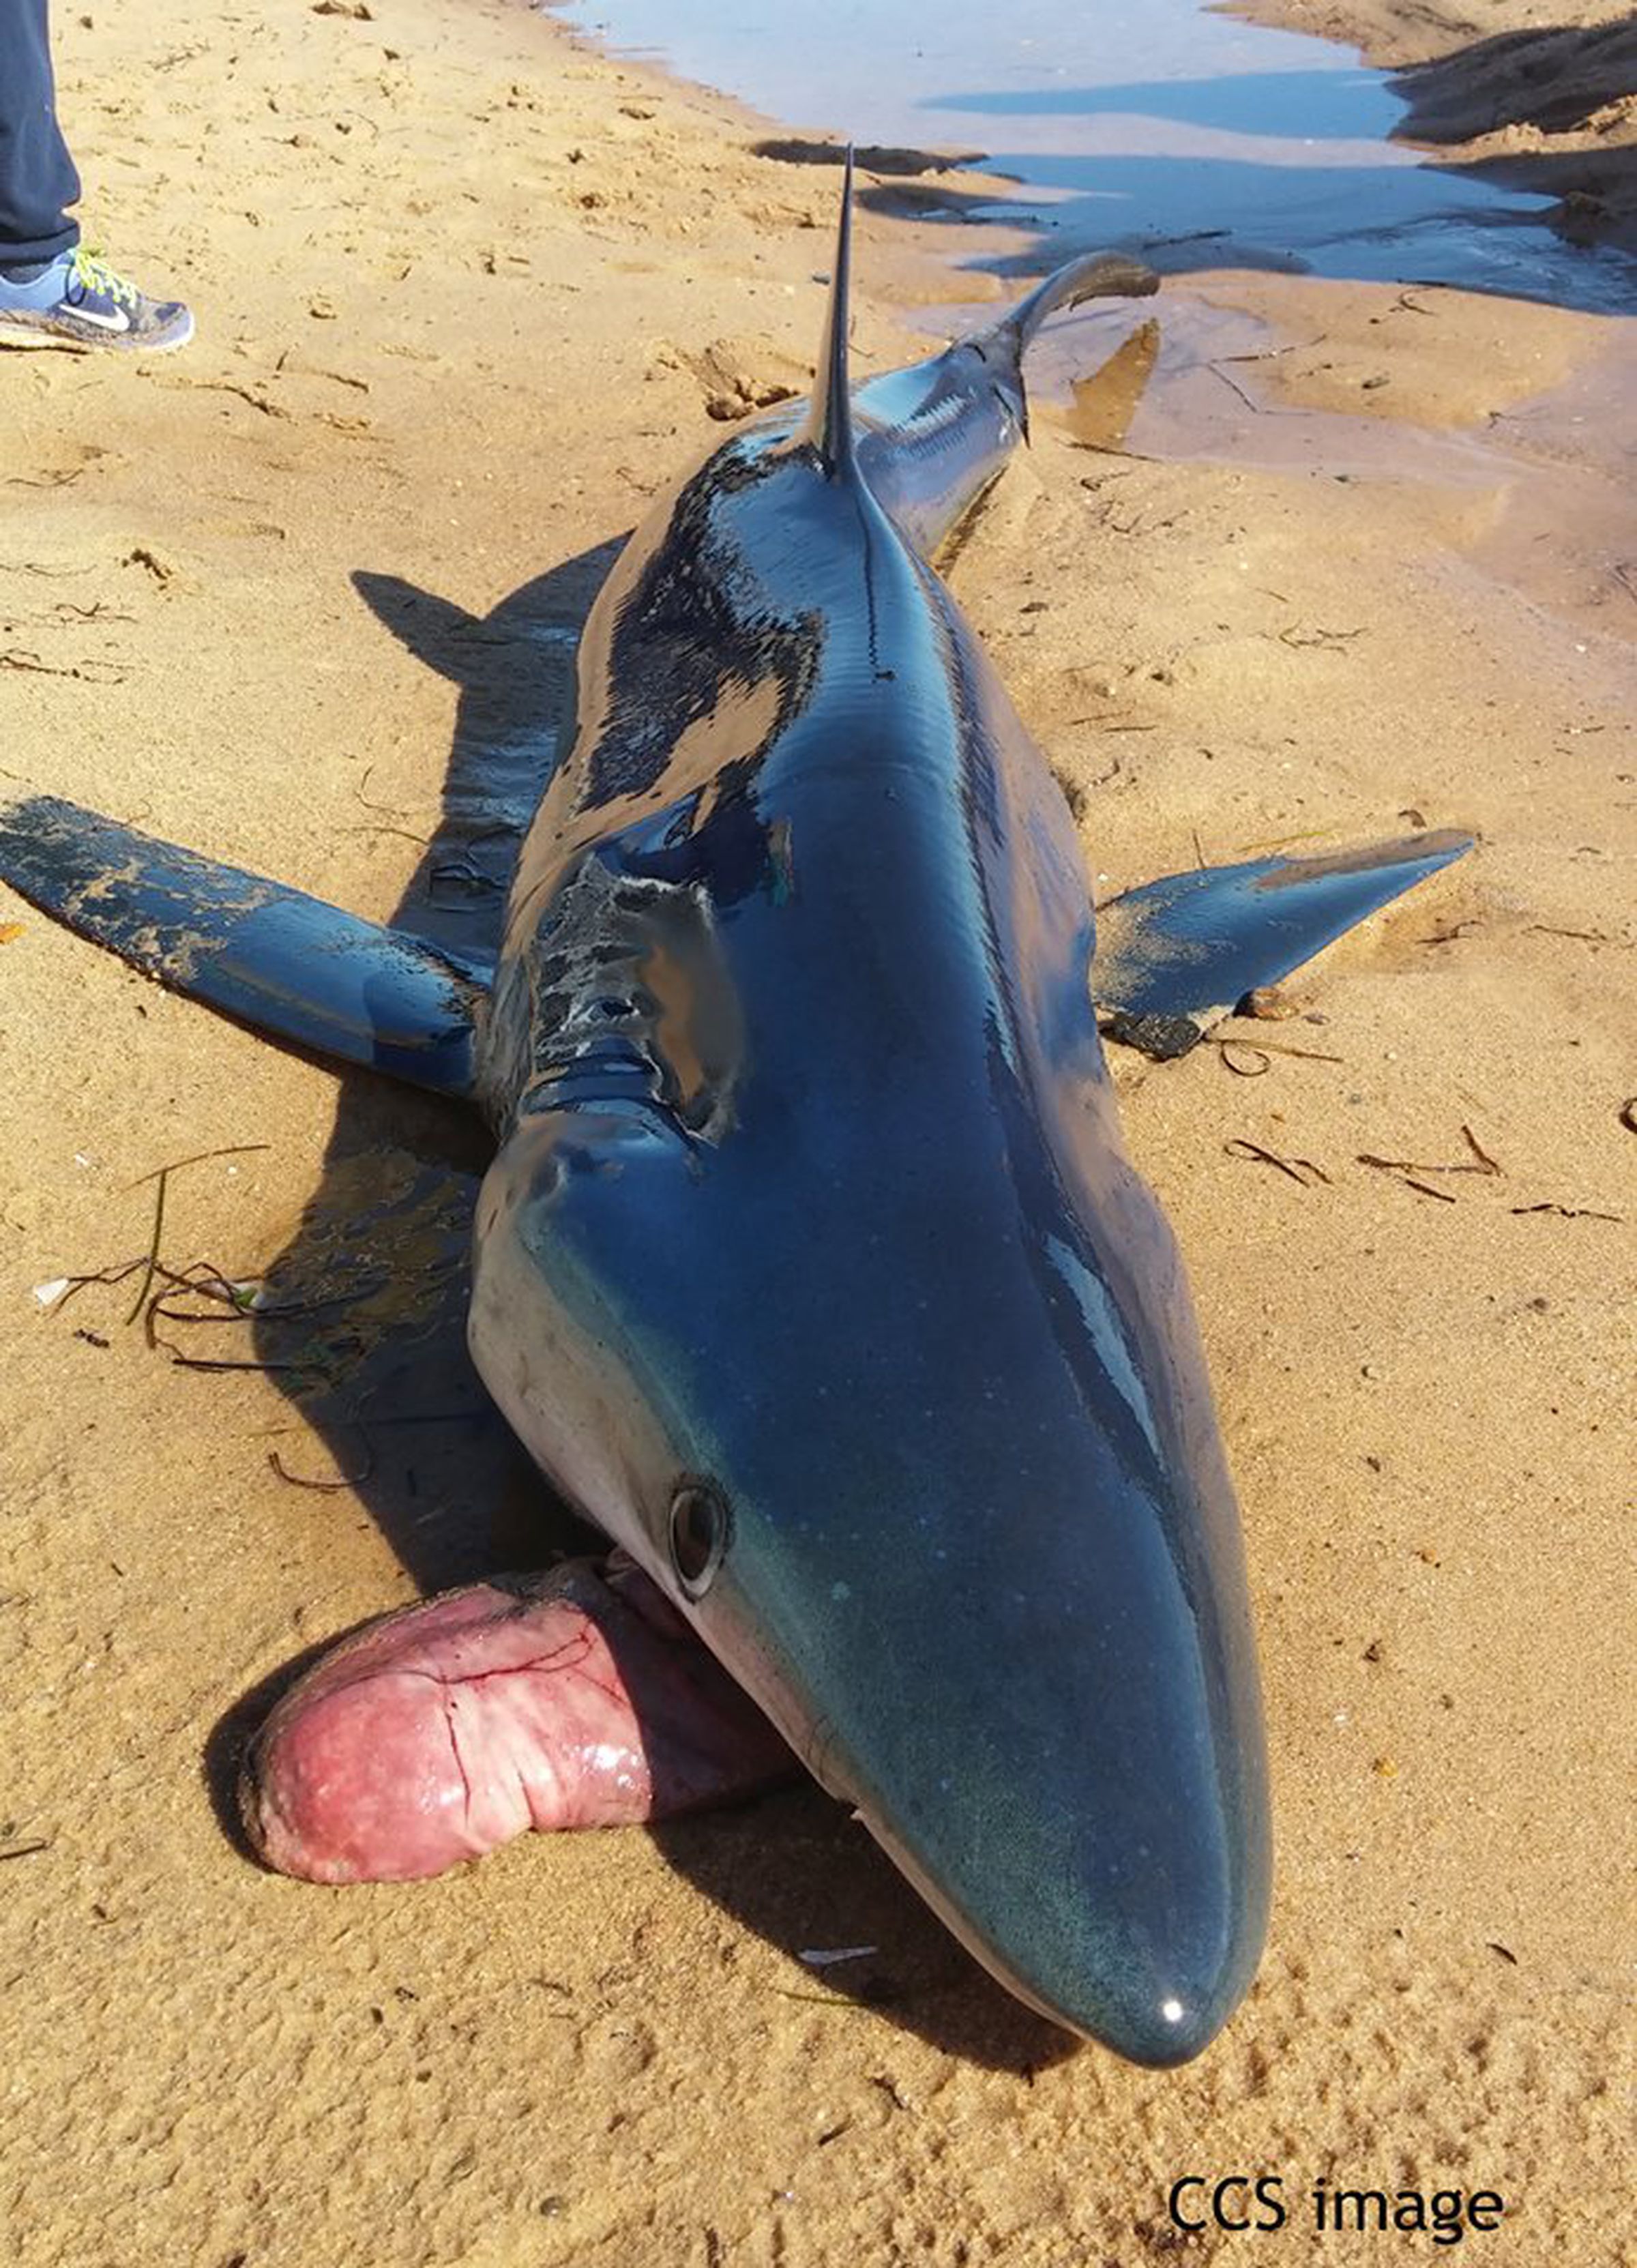 A beached blue shark regurgitated its stomach about two years ago in Provincetown, Massachusetts.